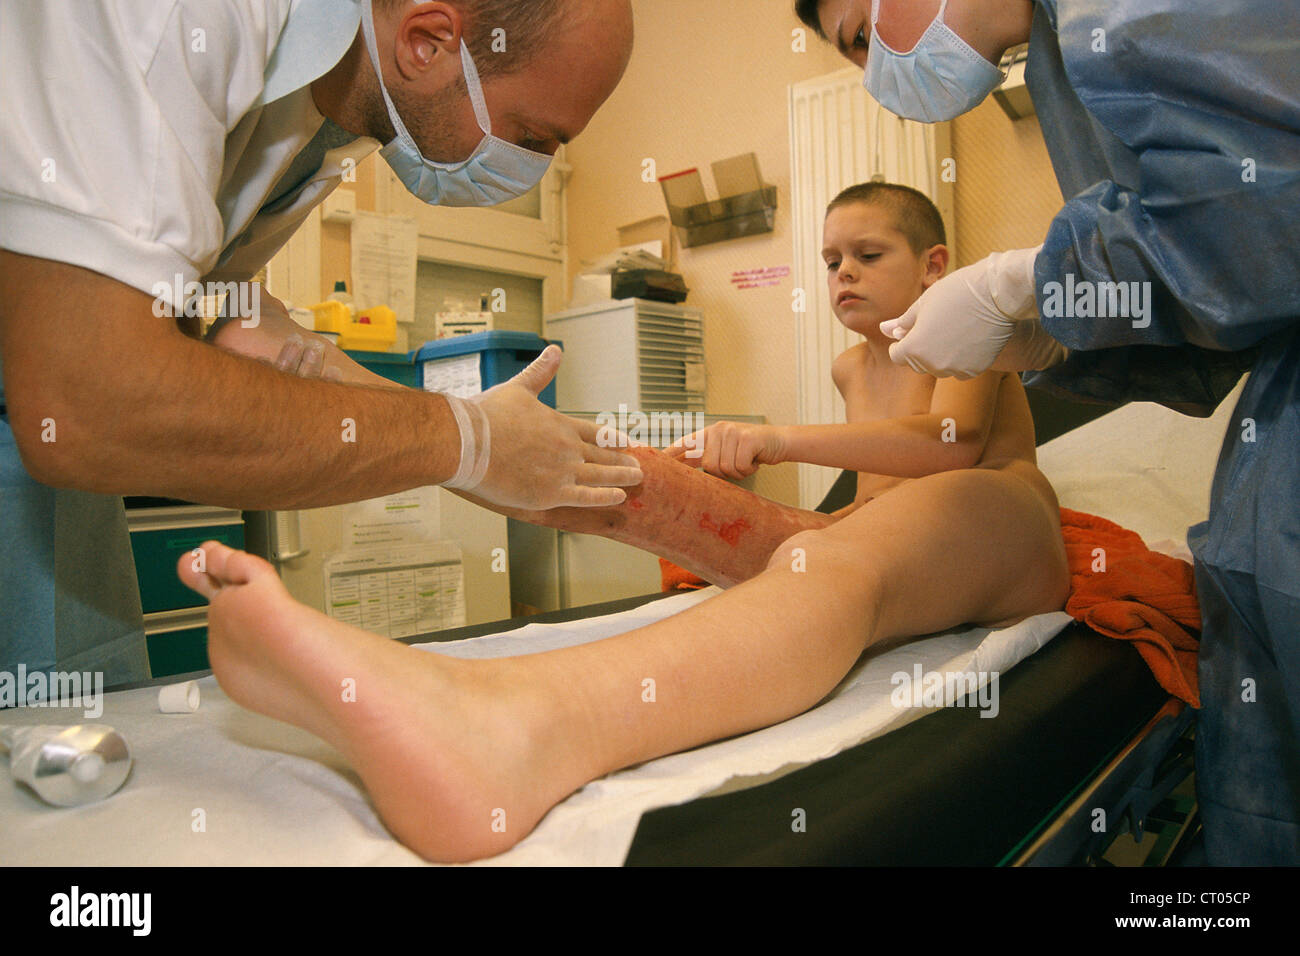 PEDIATRIC PHYSICAL THERAPY CENT. Stock Photo